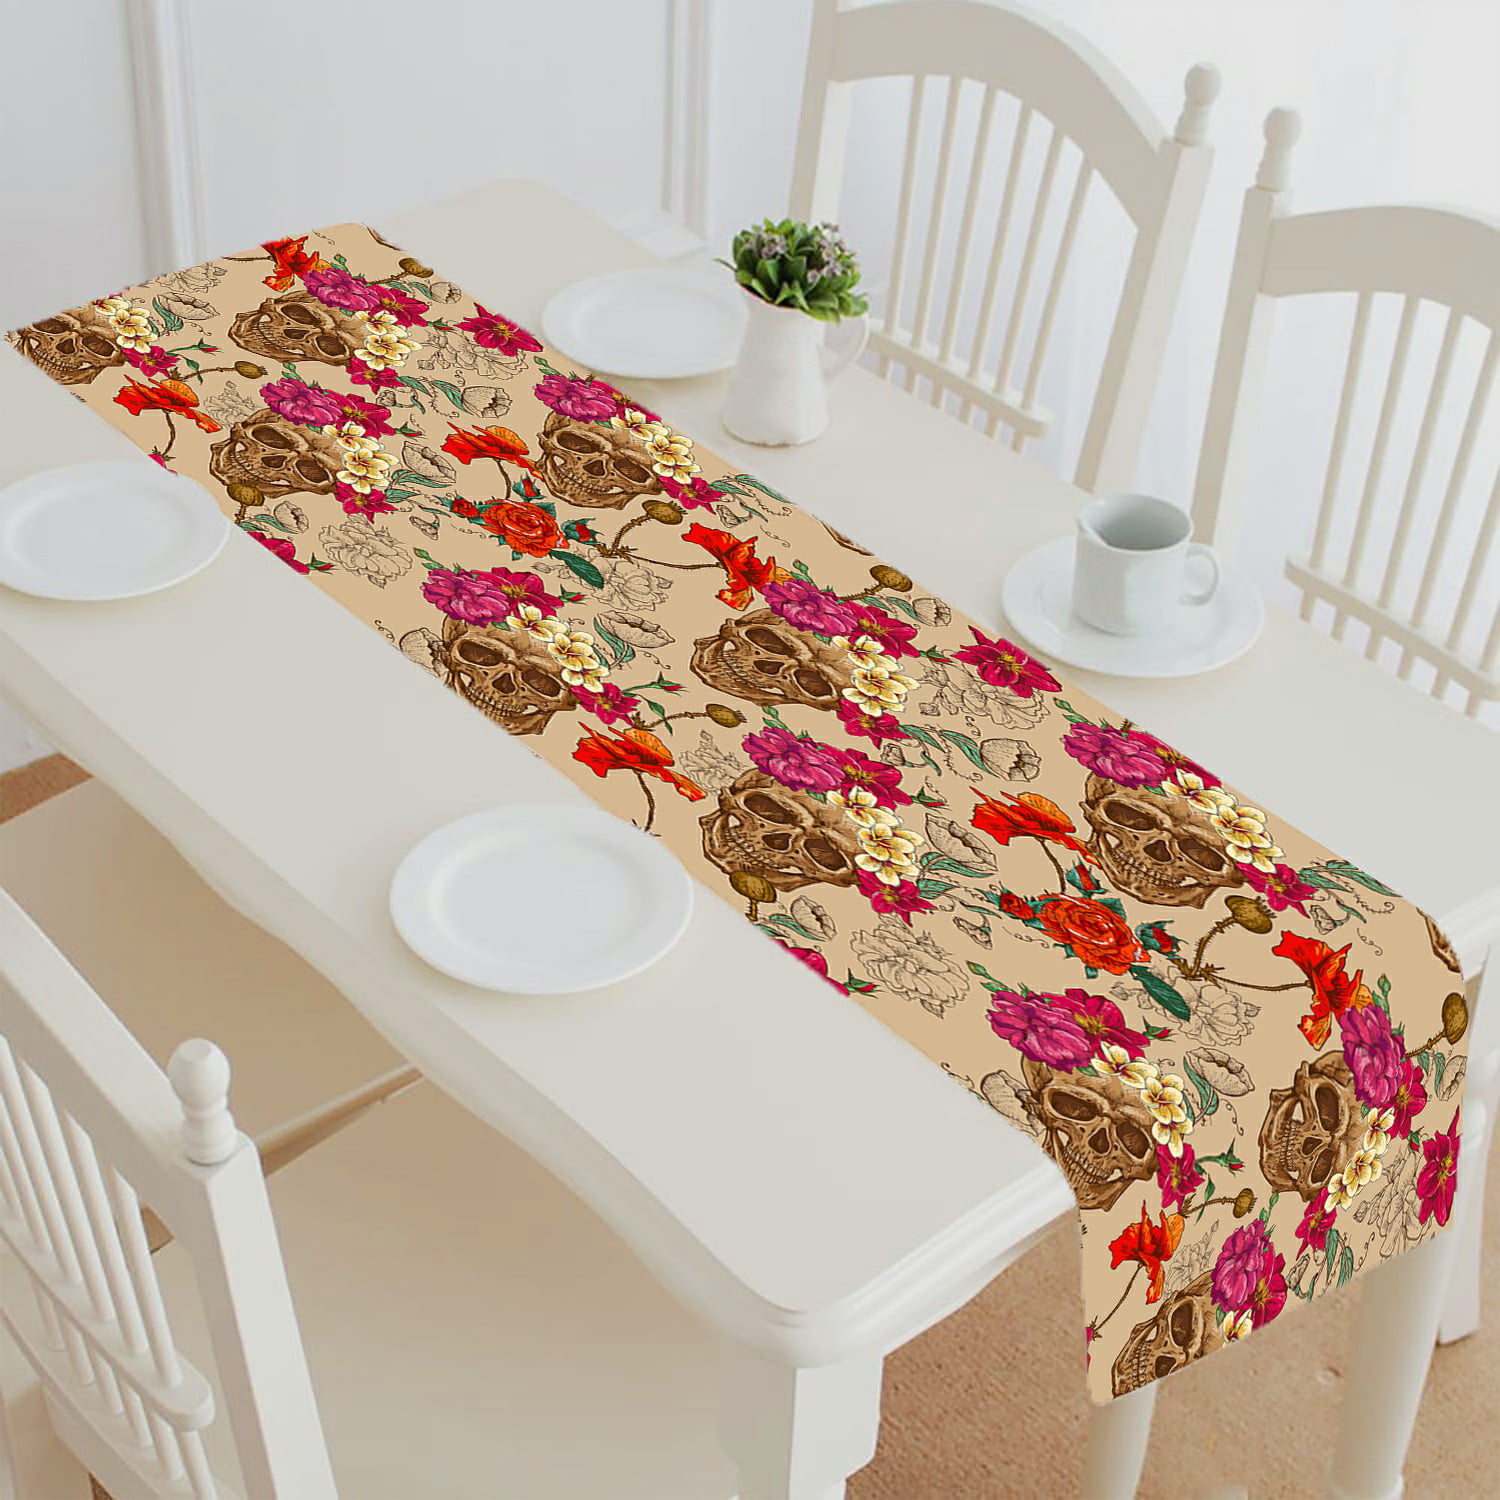 Meet 1998 Cotton Linen Table Runners Rose Flower Art Painting Tablecovers for Kitchen Garden Wedding Parties Dinner Indoor Outdoors Home Decorations Vintage 18x72 inches